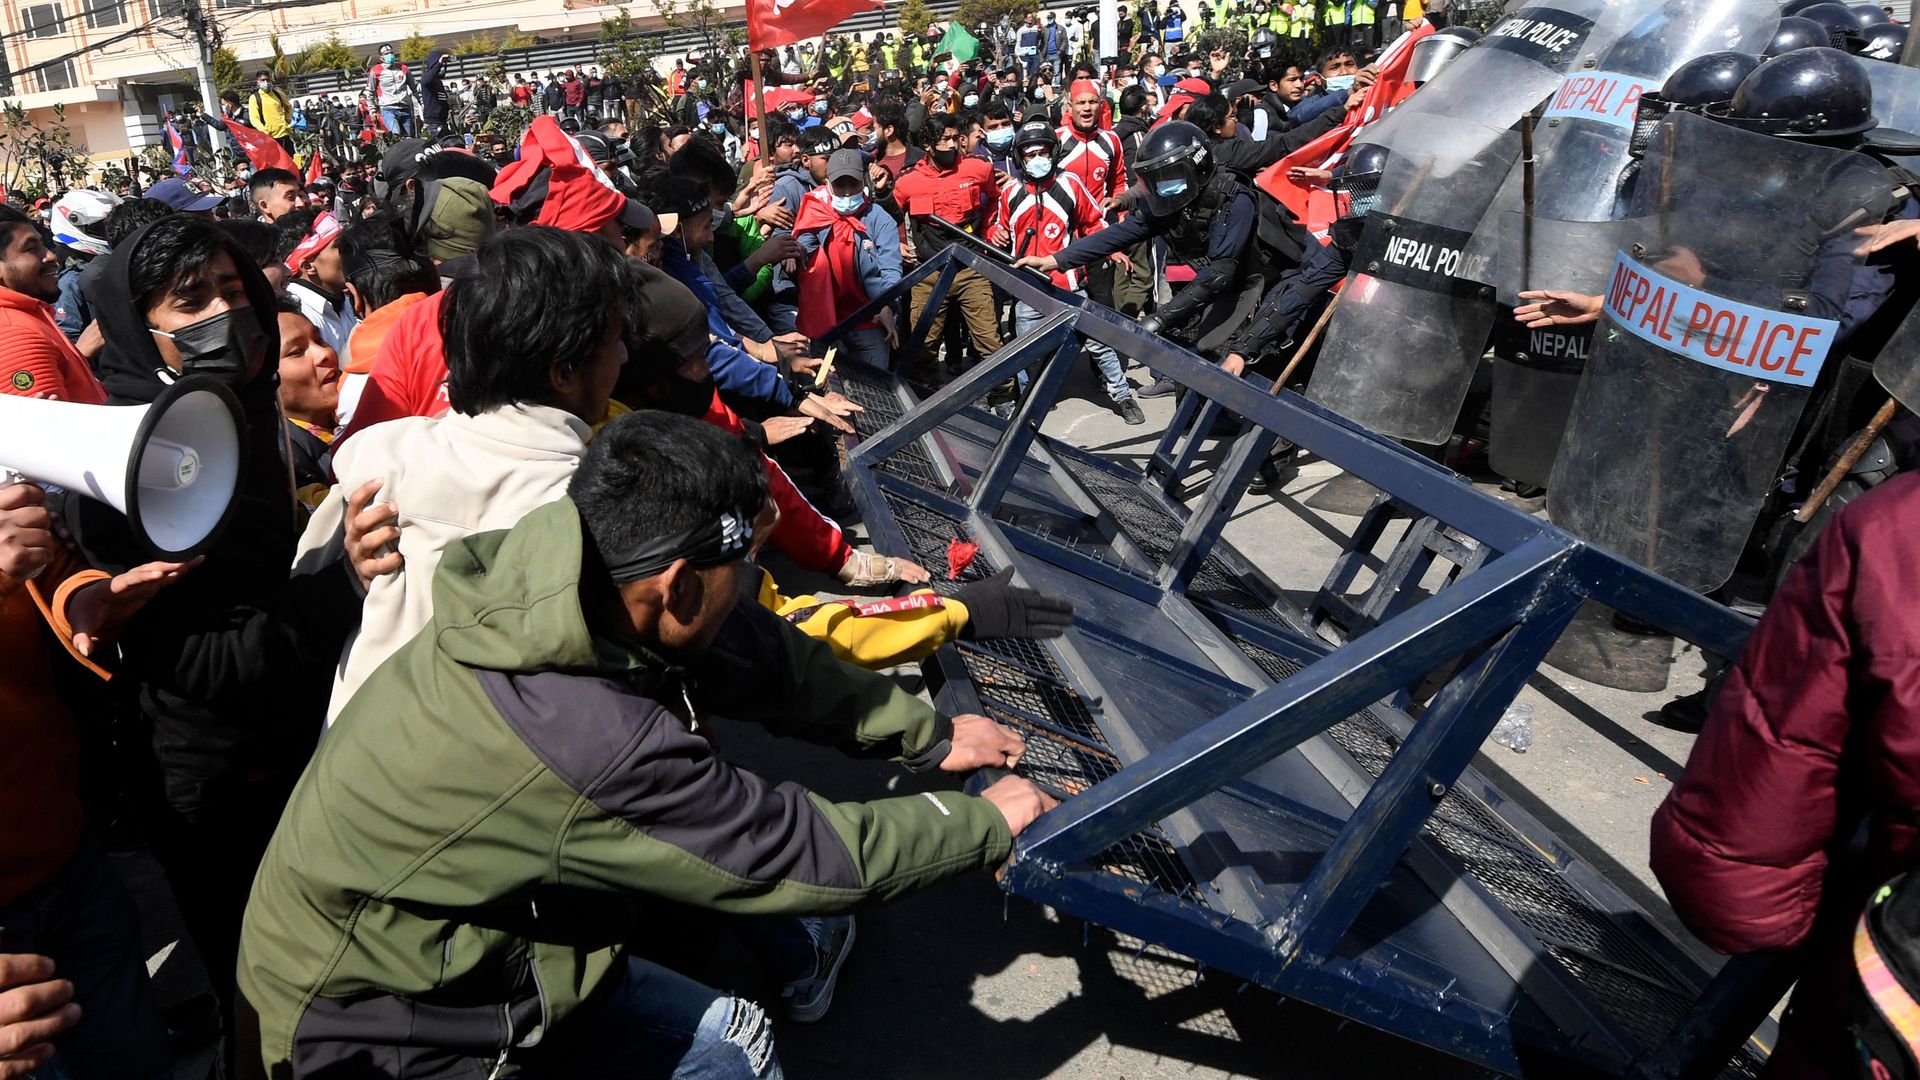 Demonstrators clash with police during a protest against the proposed grant agreement from America under the Millennium Challenge Corporation (MCC), in Kathmandu on February 20